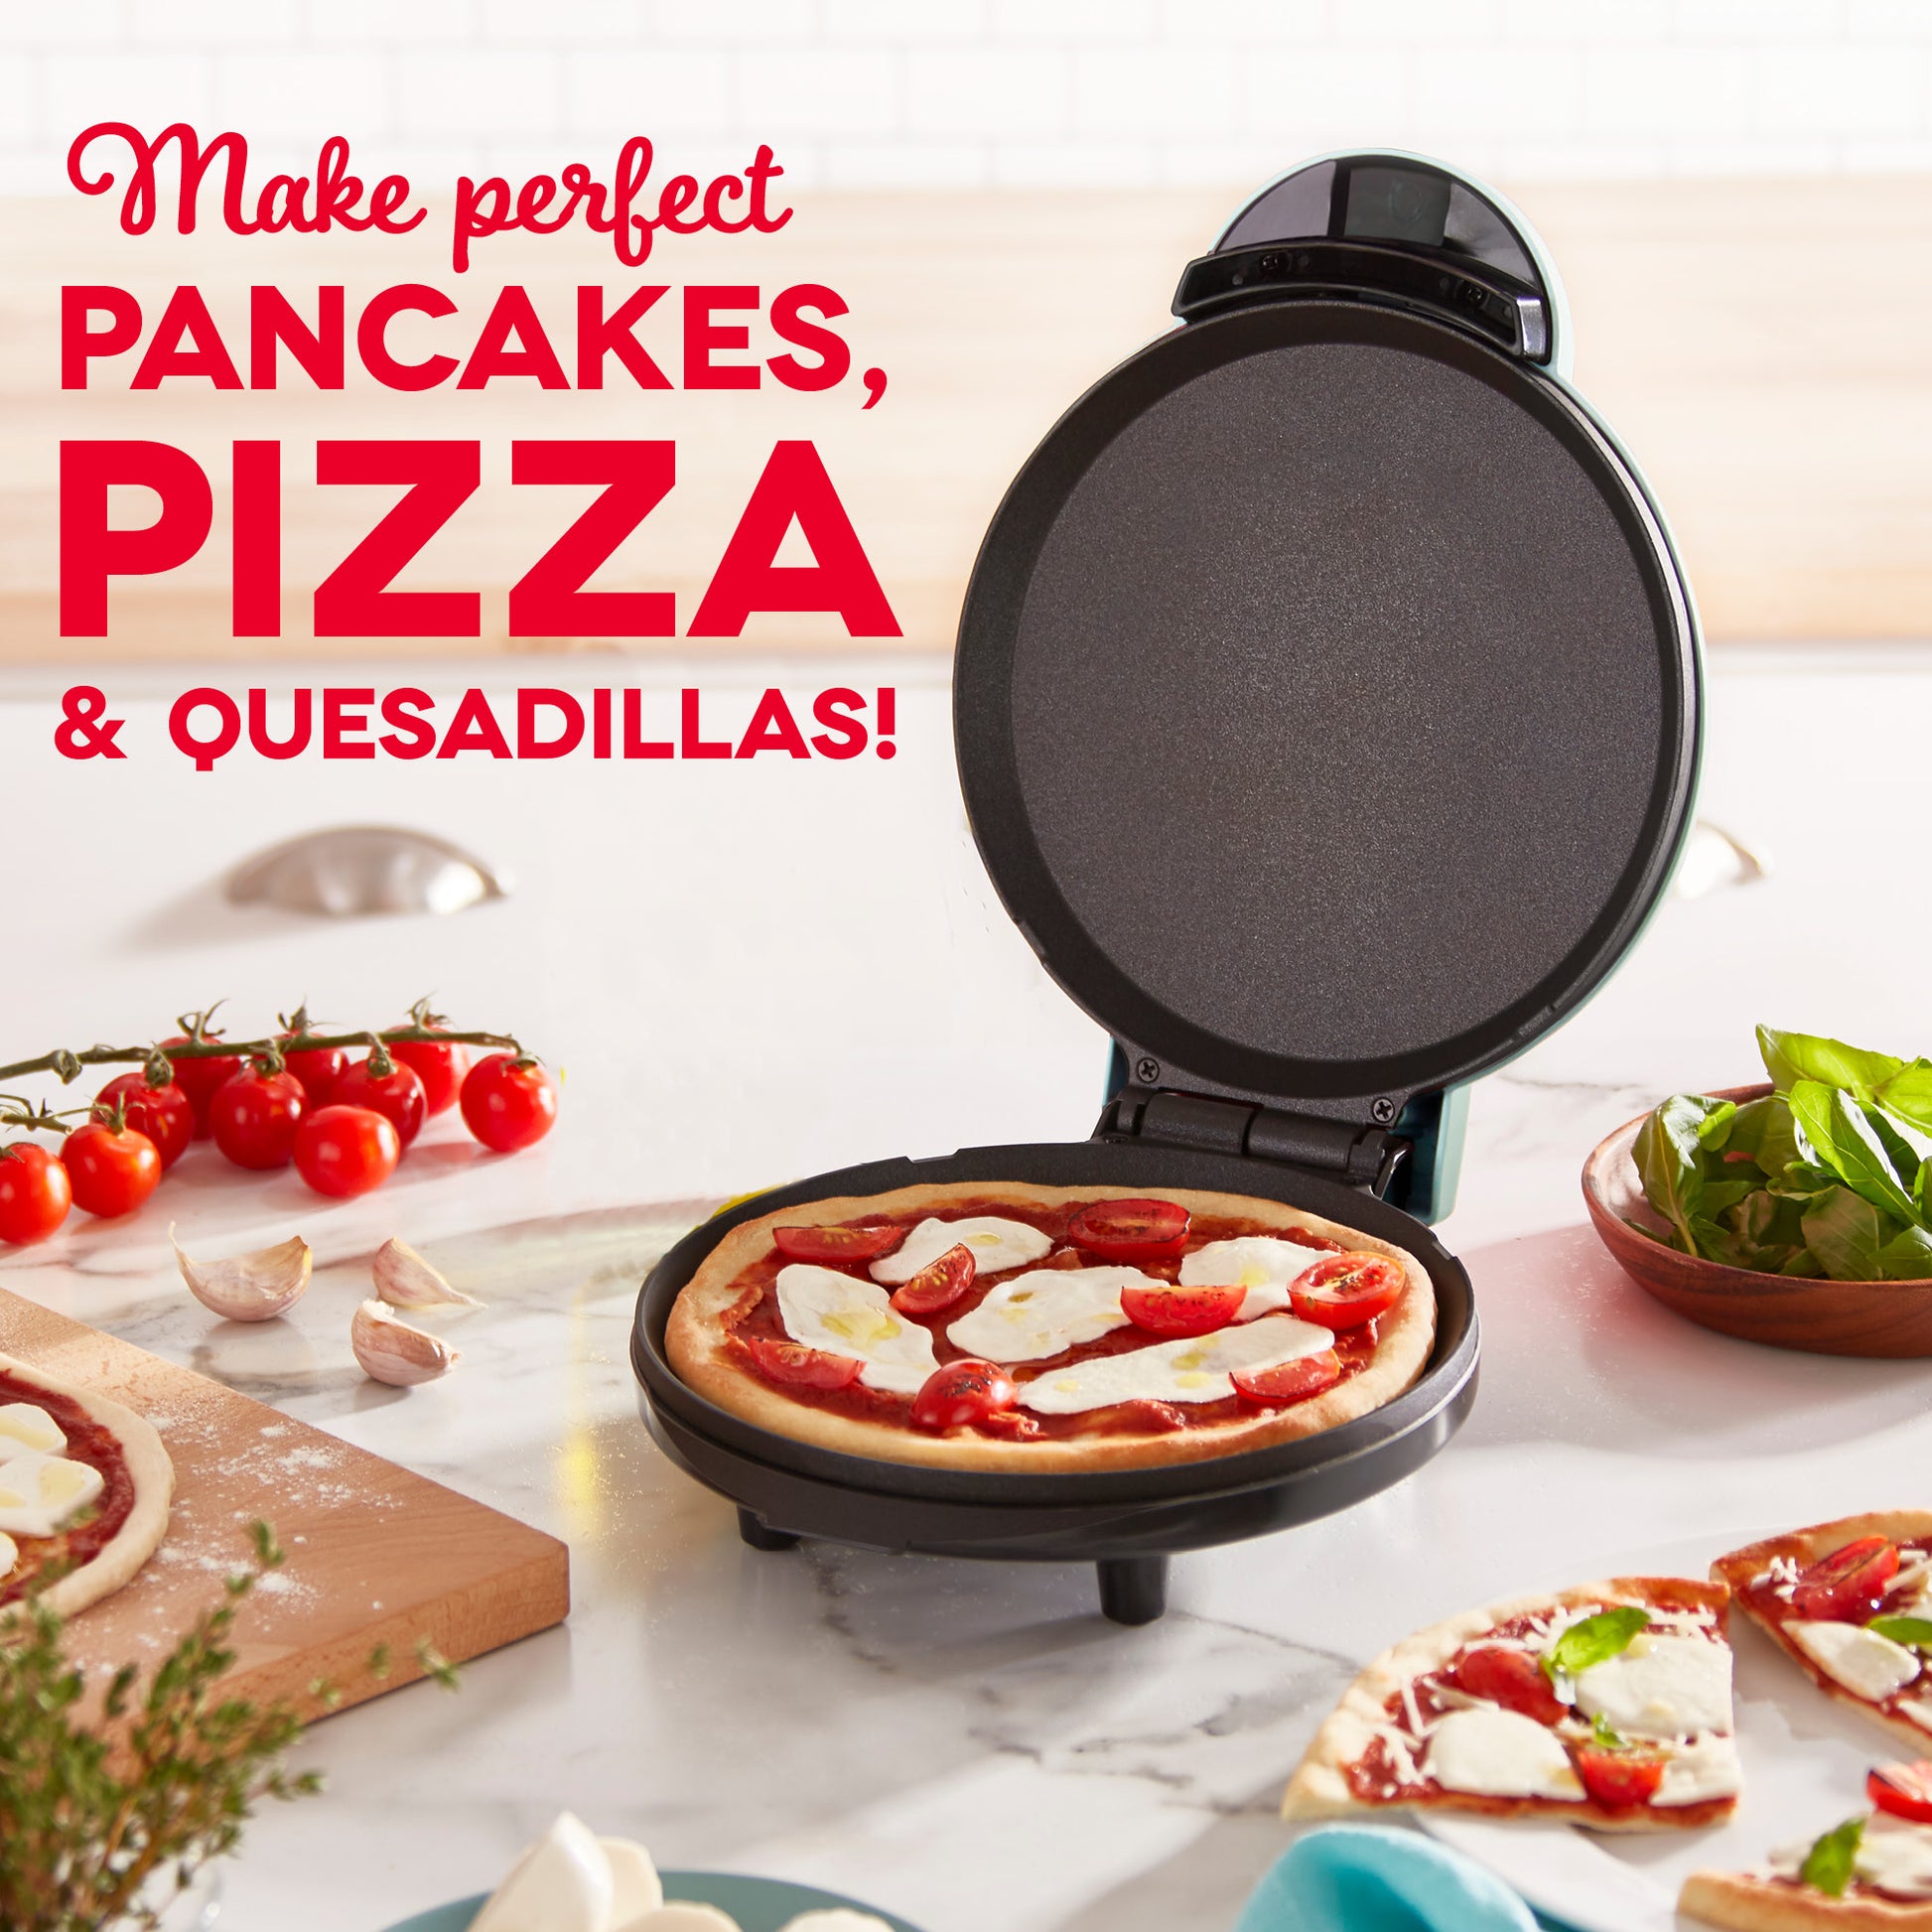 Instant Crepe Maker, Crepe Makers in Electric Grills & Skillets, 7in  Electric Crepe Maker Pizza Pancake Machine Non-stick Griddle, Household  Non-stick